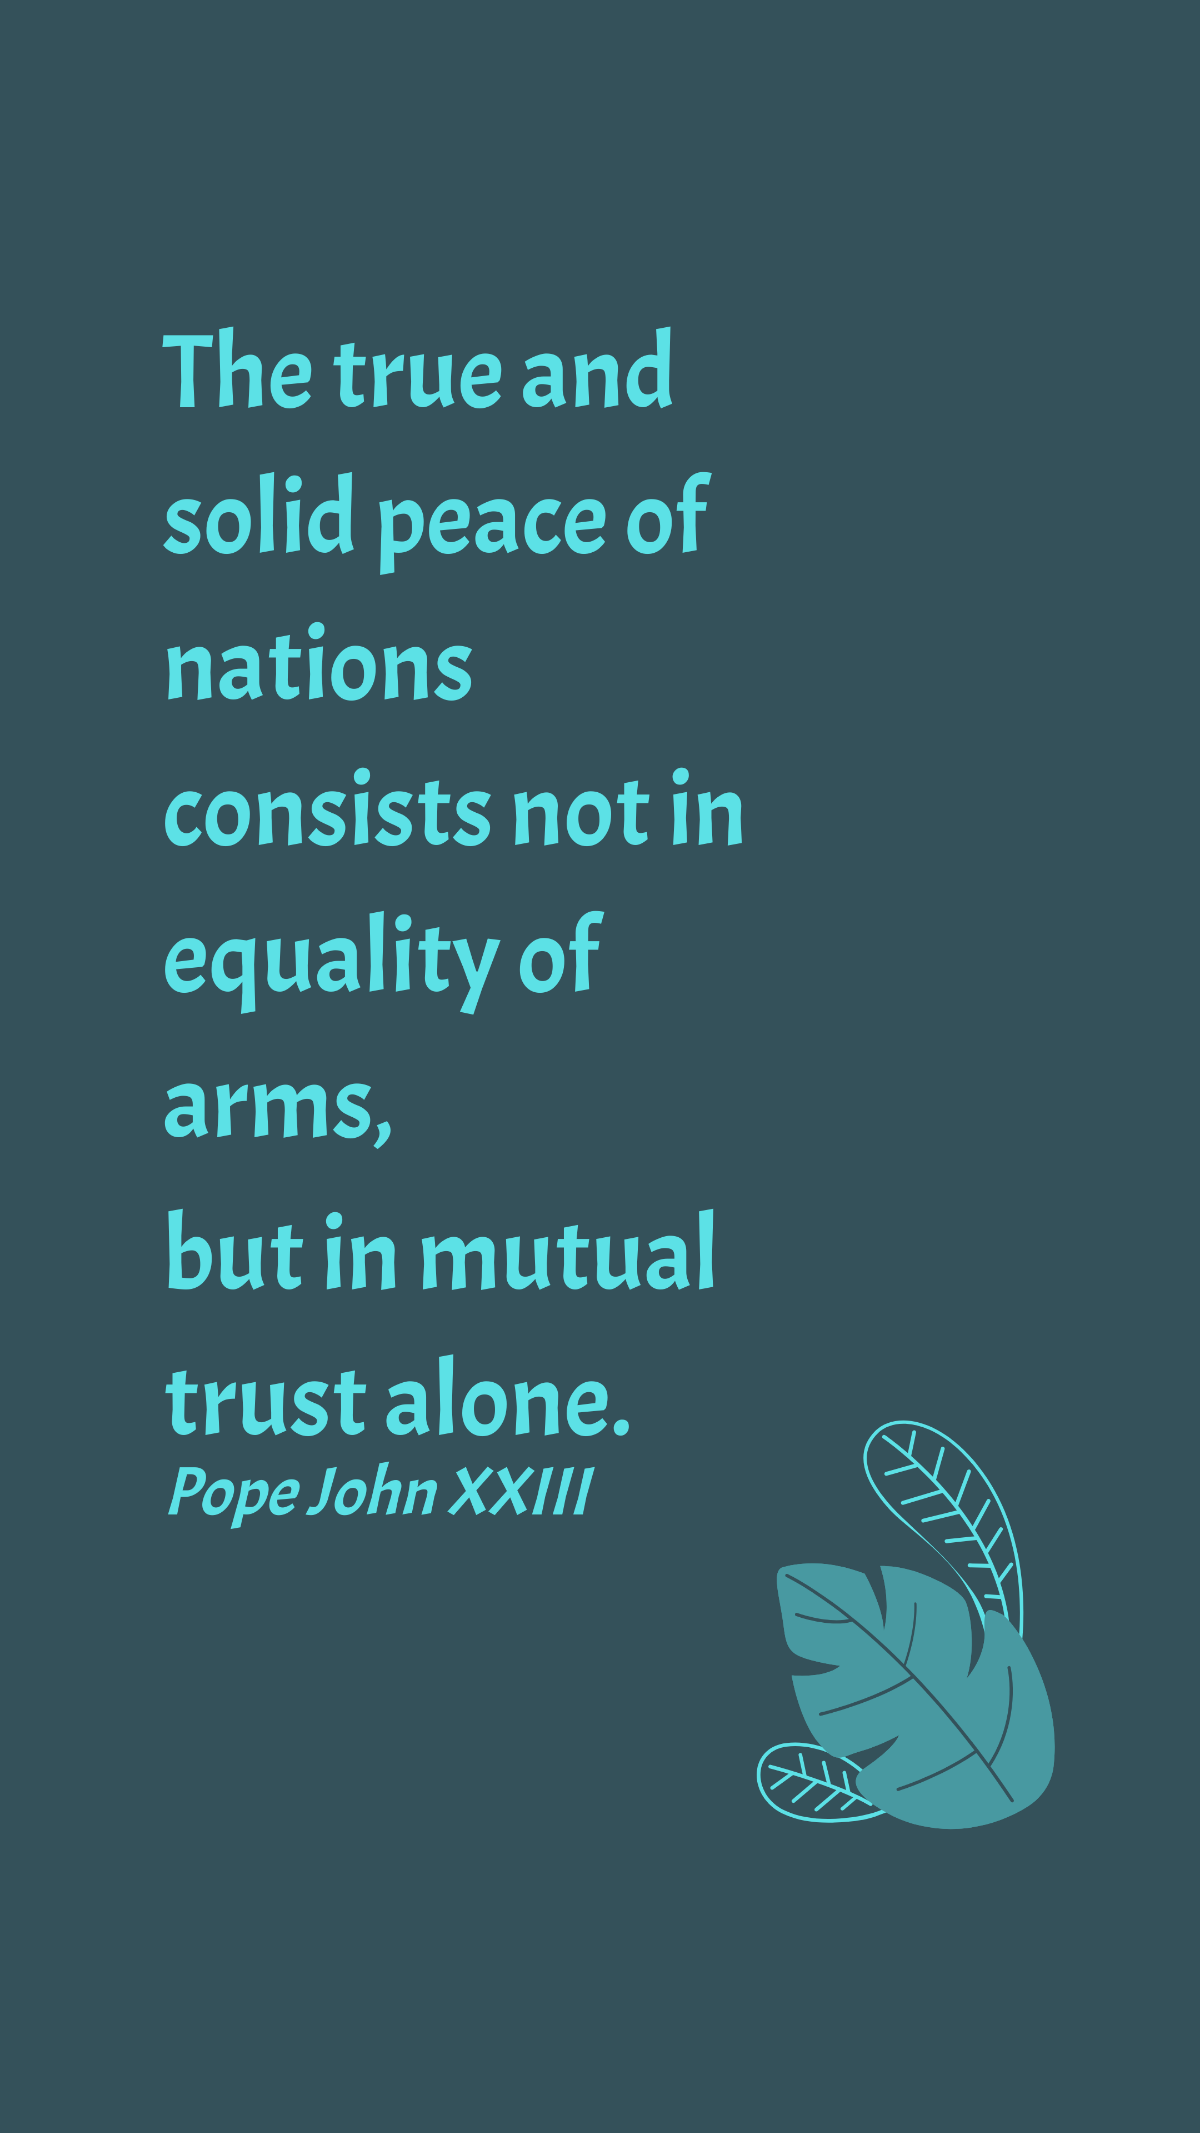 Pope John XXIII - The true and solid peace of nations consists not in equality of arms, but in mutual trust alone. Template